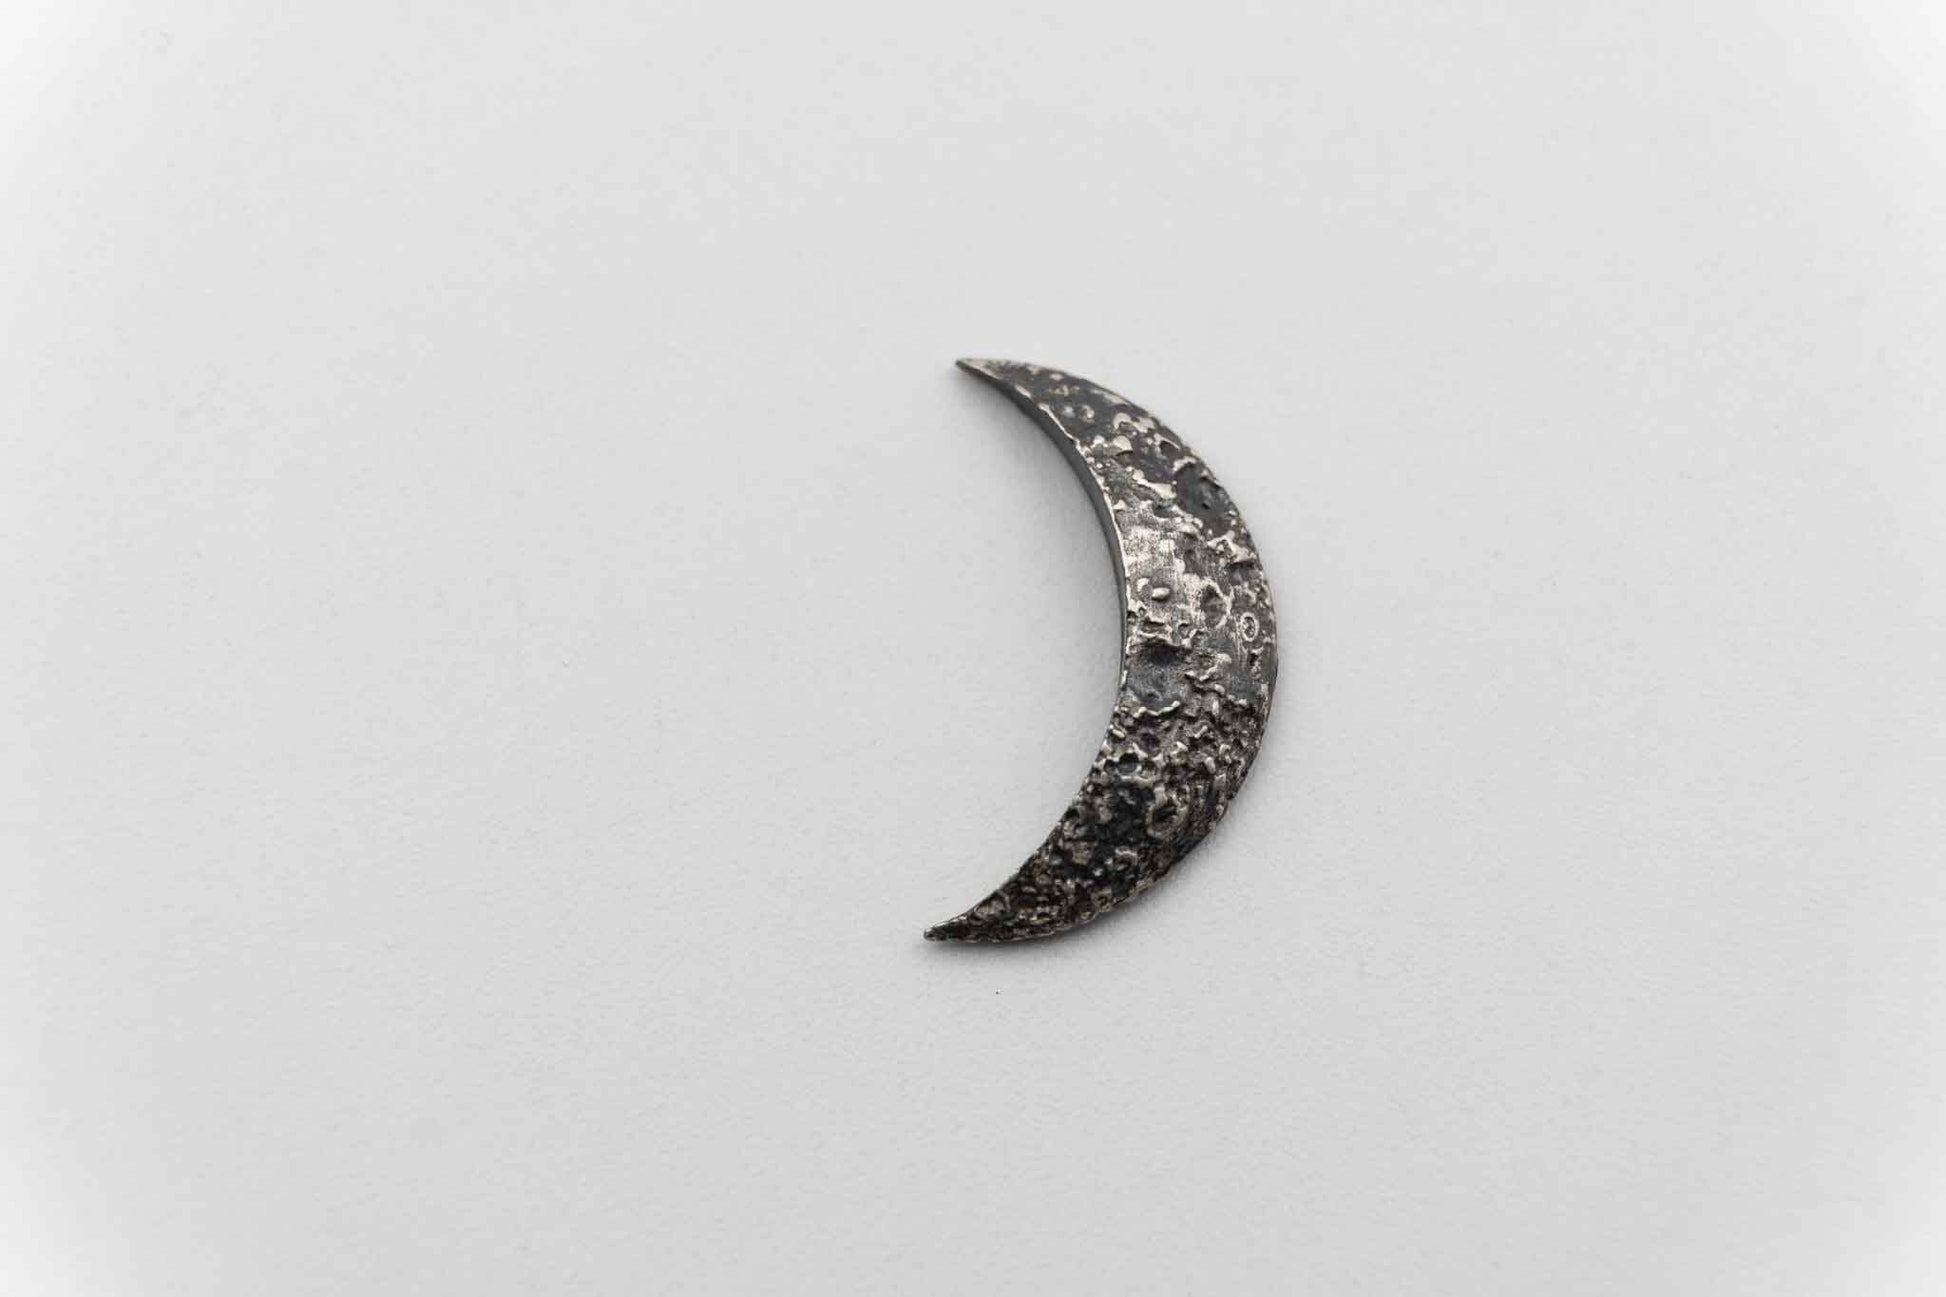 Waxing Crescent Lunar Moon Phase Casting